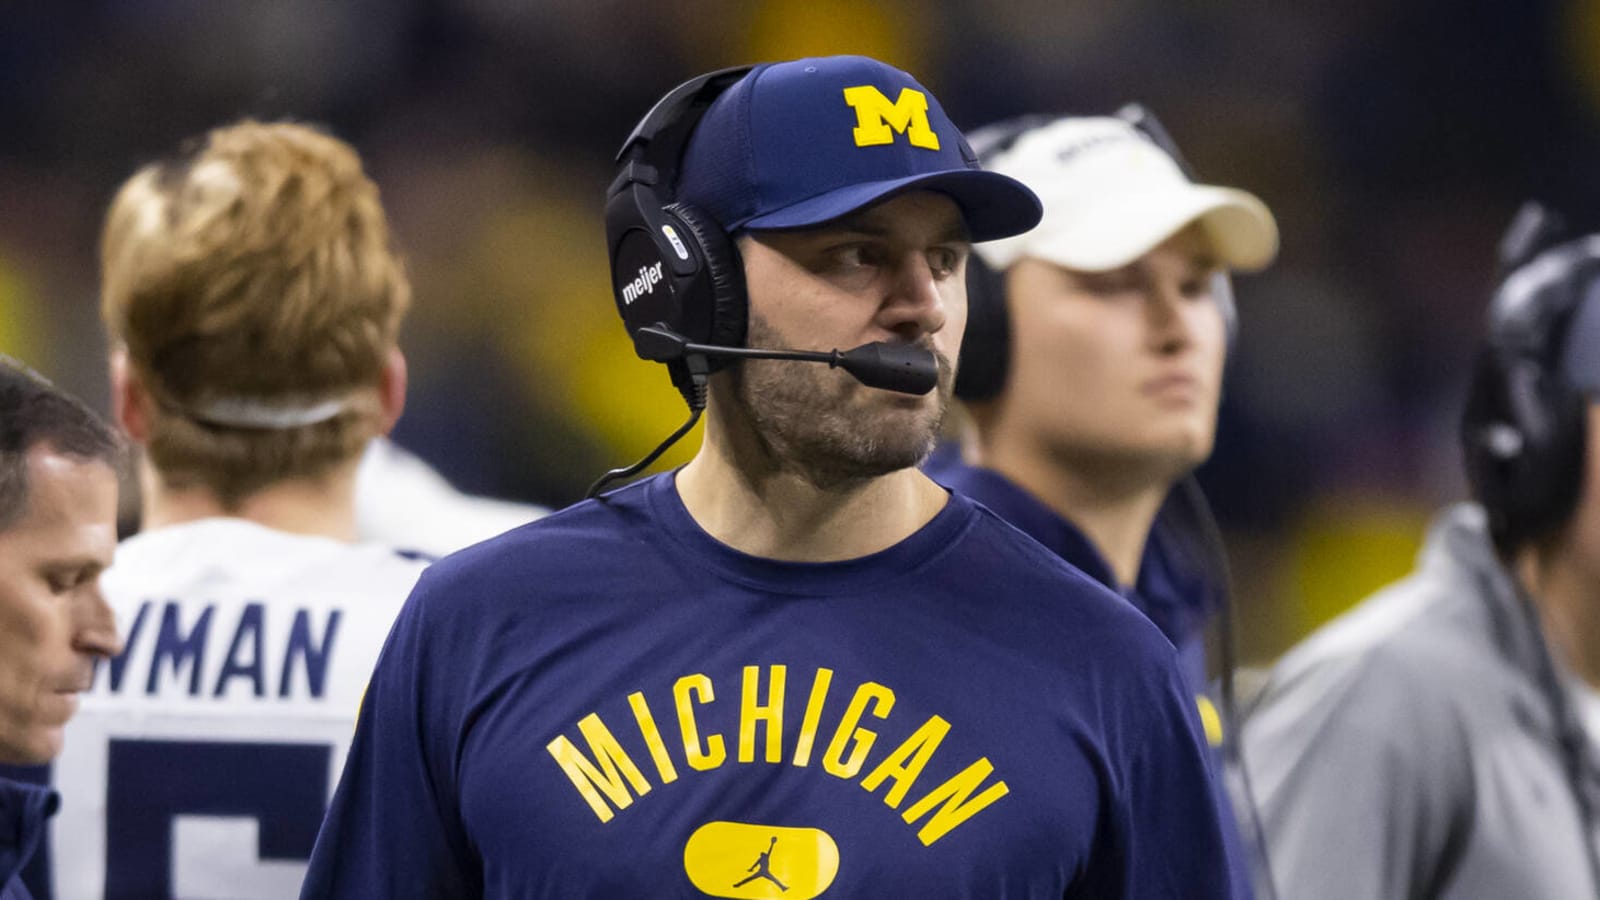 Michigan Wolverines: Was Former OC Matt Weiss Connected To Sign-Stealing?